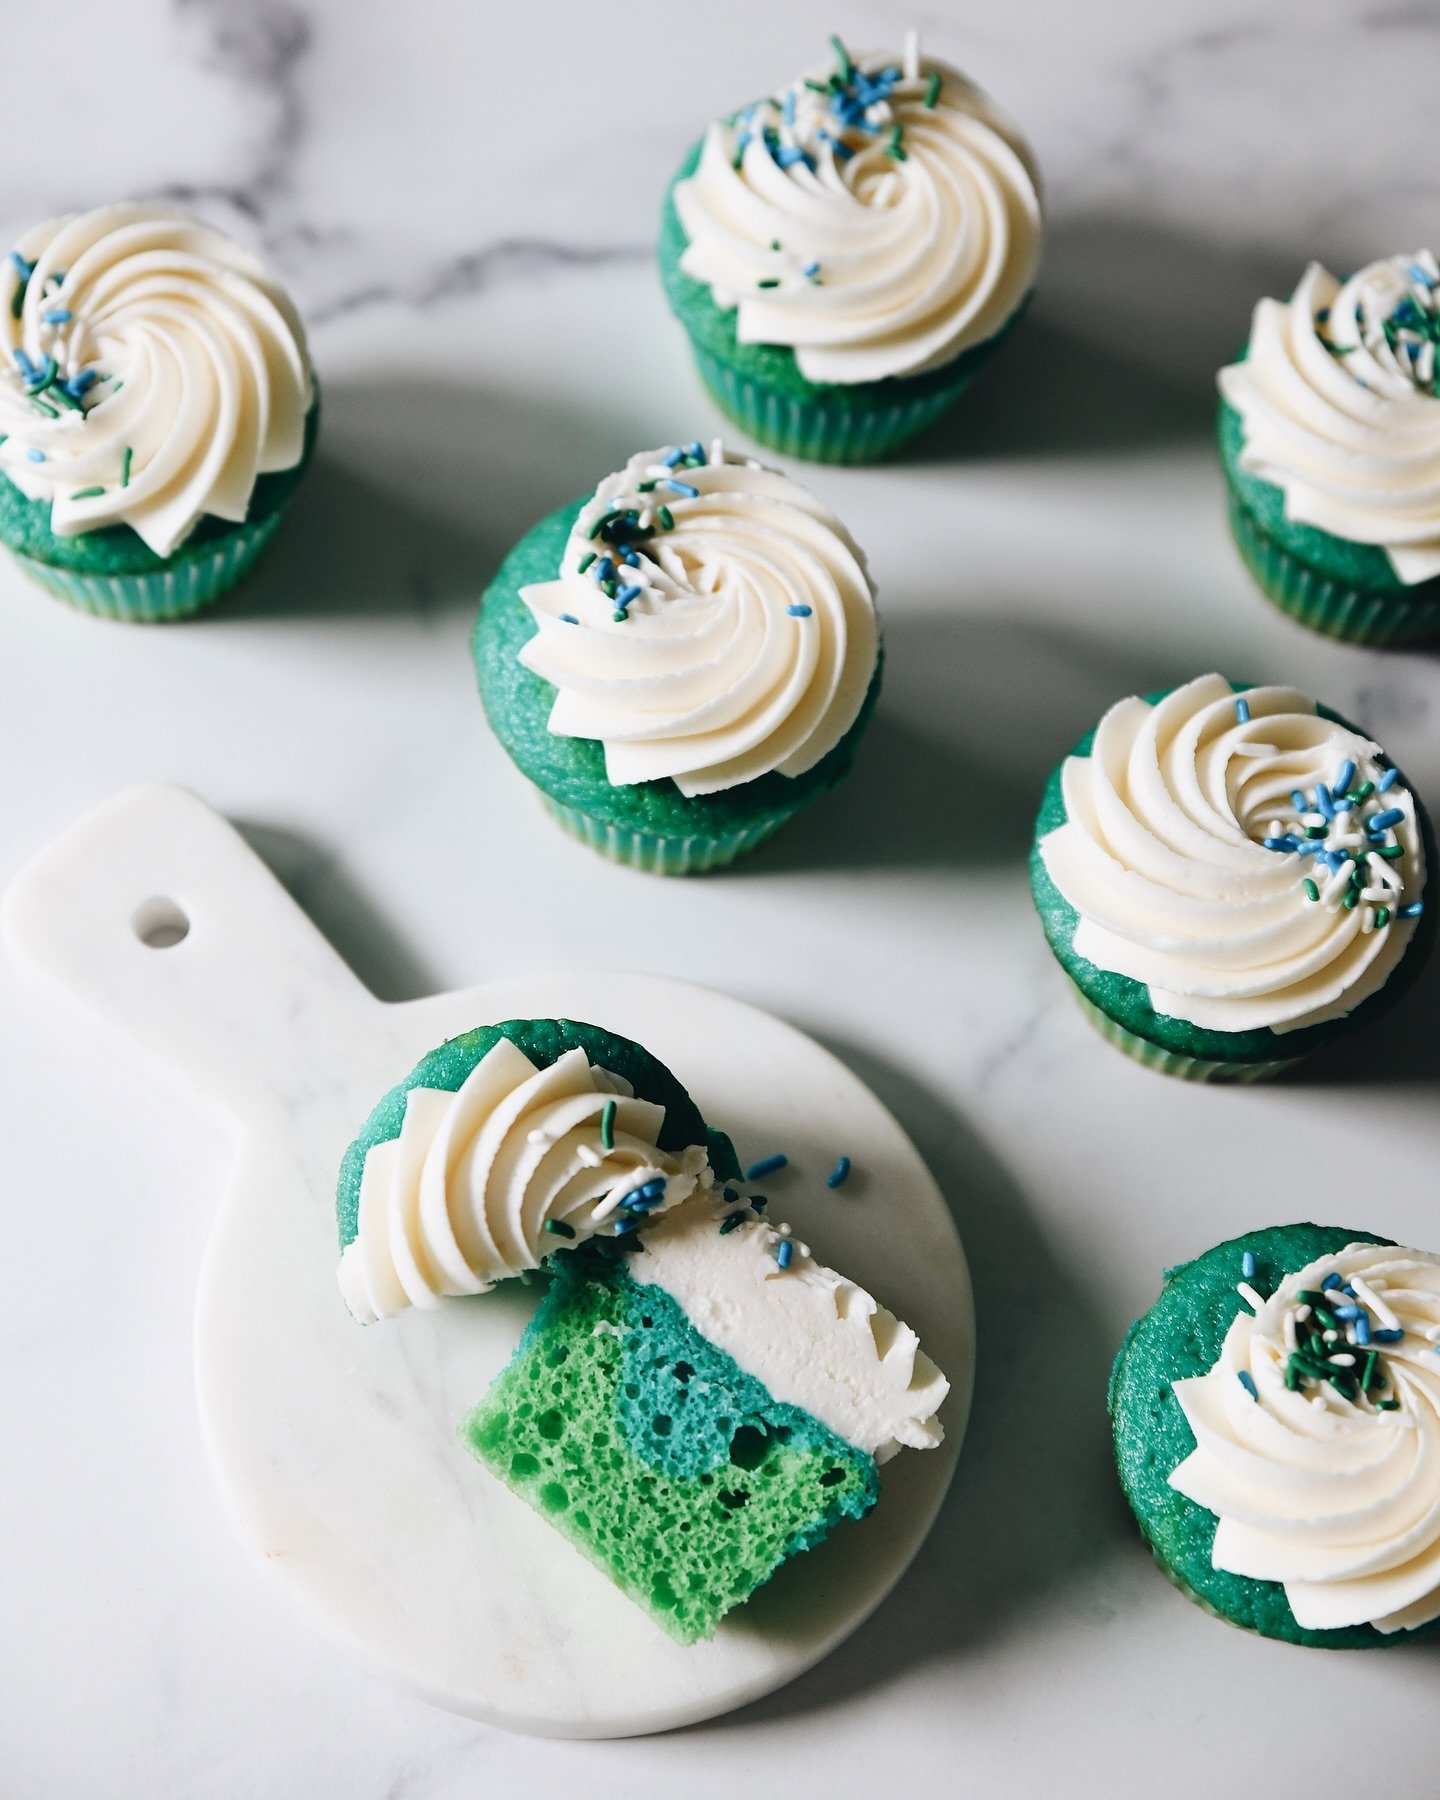 Sharing an oldie but a goodie to get you ready for Earth Day!🌎 These Earth-inspired cupcakes start with a @realduncanhines mix and are simple to make at home. 

🧁Check out the recipe and tips at the link in our Bio